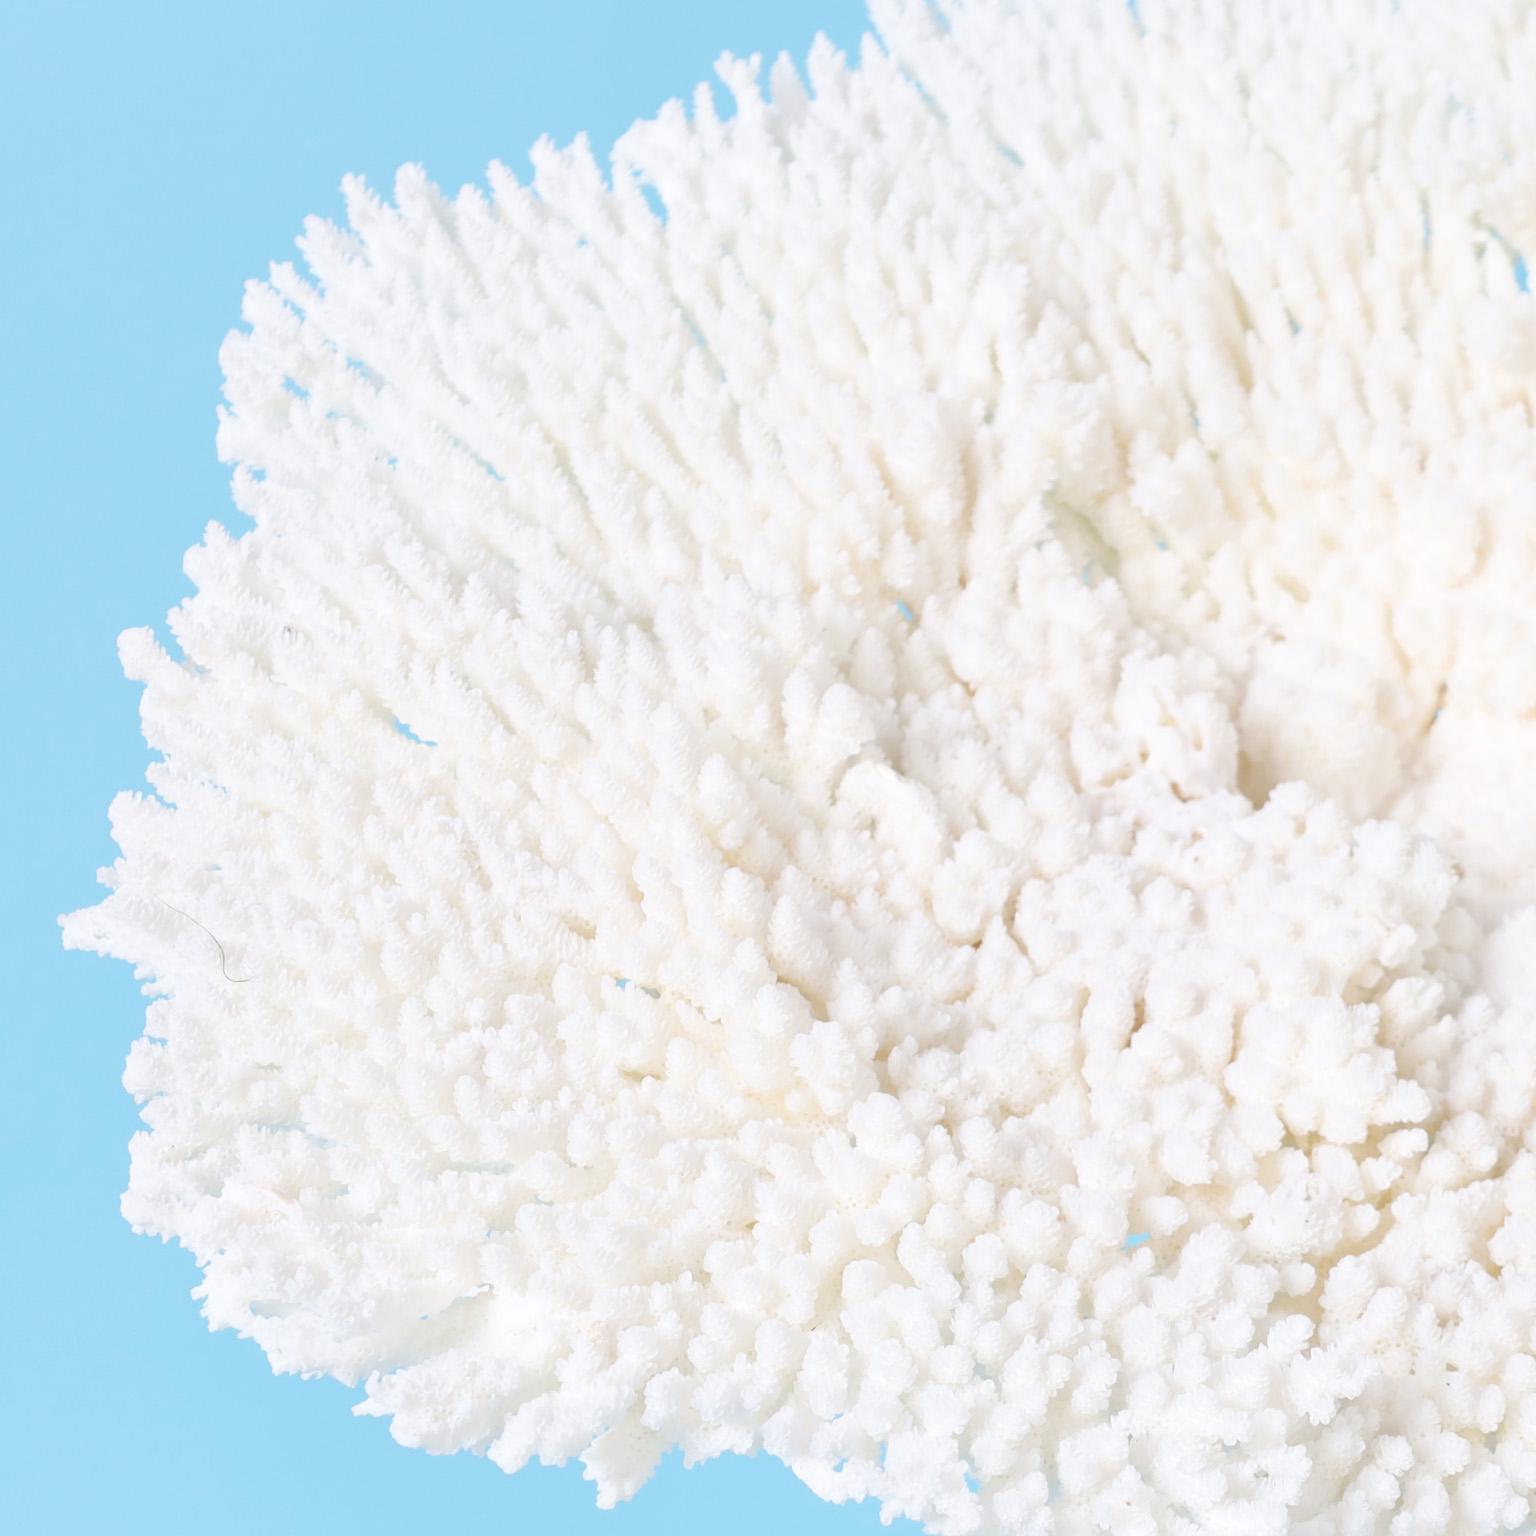 Striking white coral sculpture or assemblage hand crafted in sustainable staghorn and table coral with its sea inspired forms and textures. Presented on a lucite base.

Available only in the United States of America, shipping outside of the